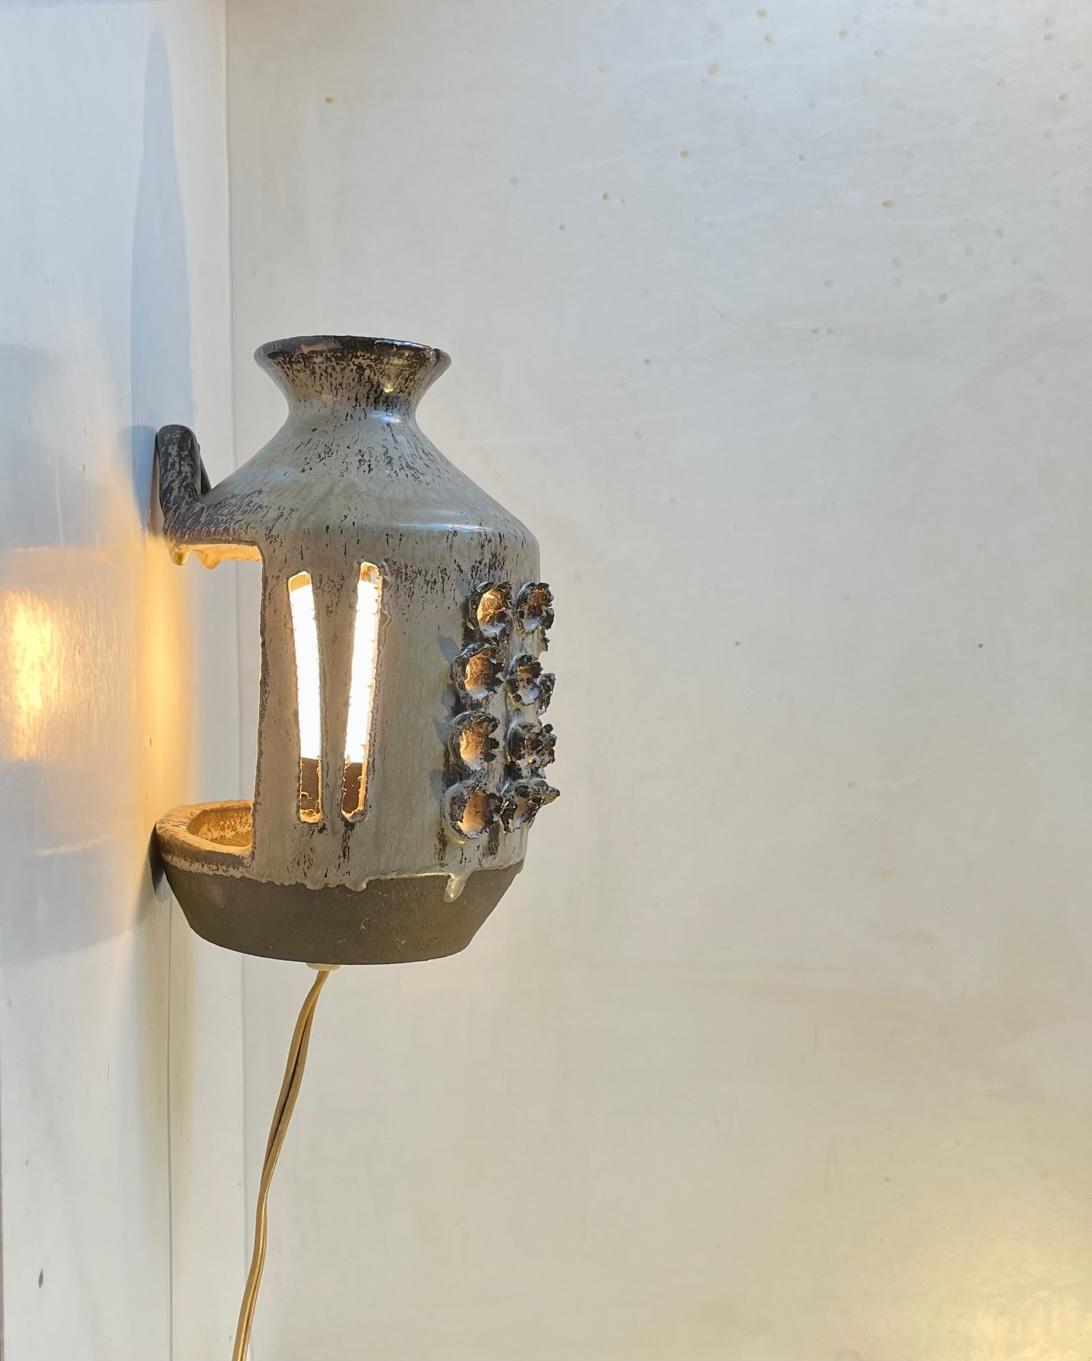 Unusual vase shaped wall sconce with deconstructed brutalist styling and hares-fur glaze. Studio made at Stentøj Denmark circa 1970 in a style reminiscent of Søholm and Kingo. Measurements: H: 19 cm, W: 13 cm, Dept: 13 cm. 

For the US. It will